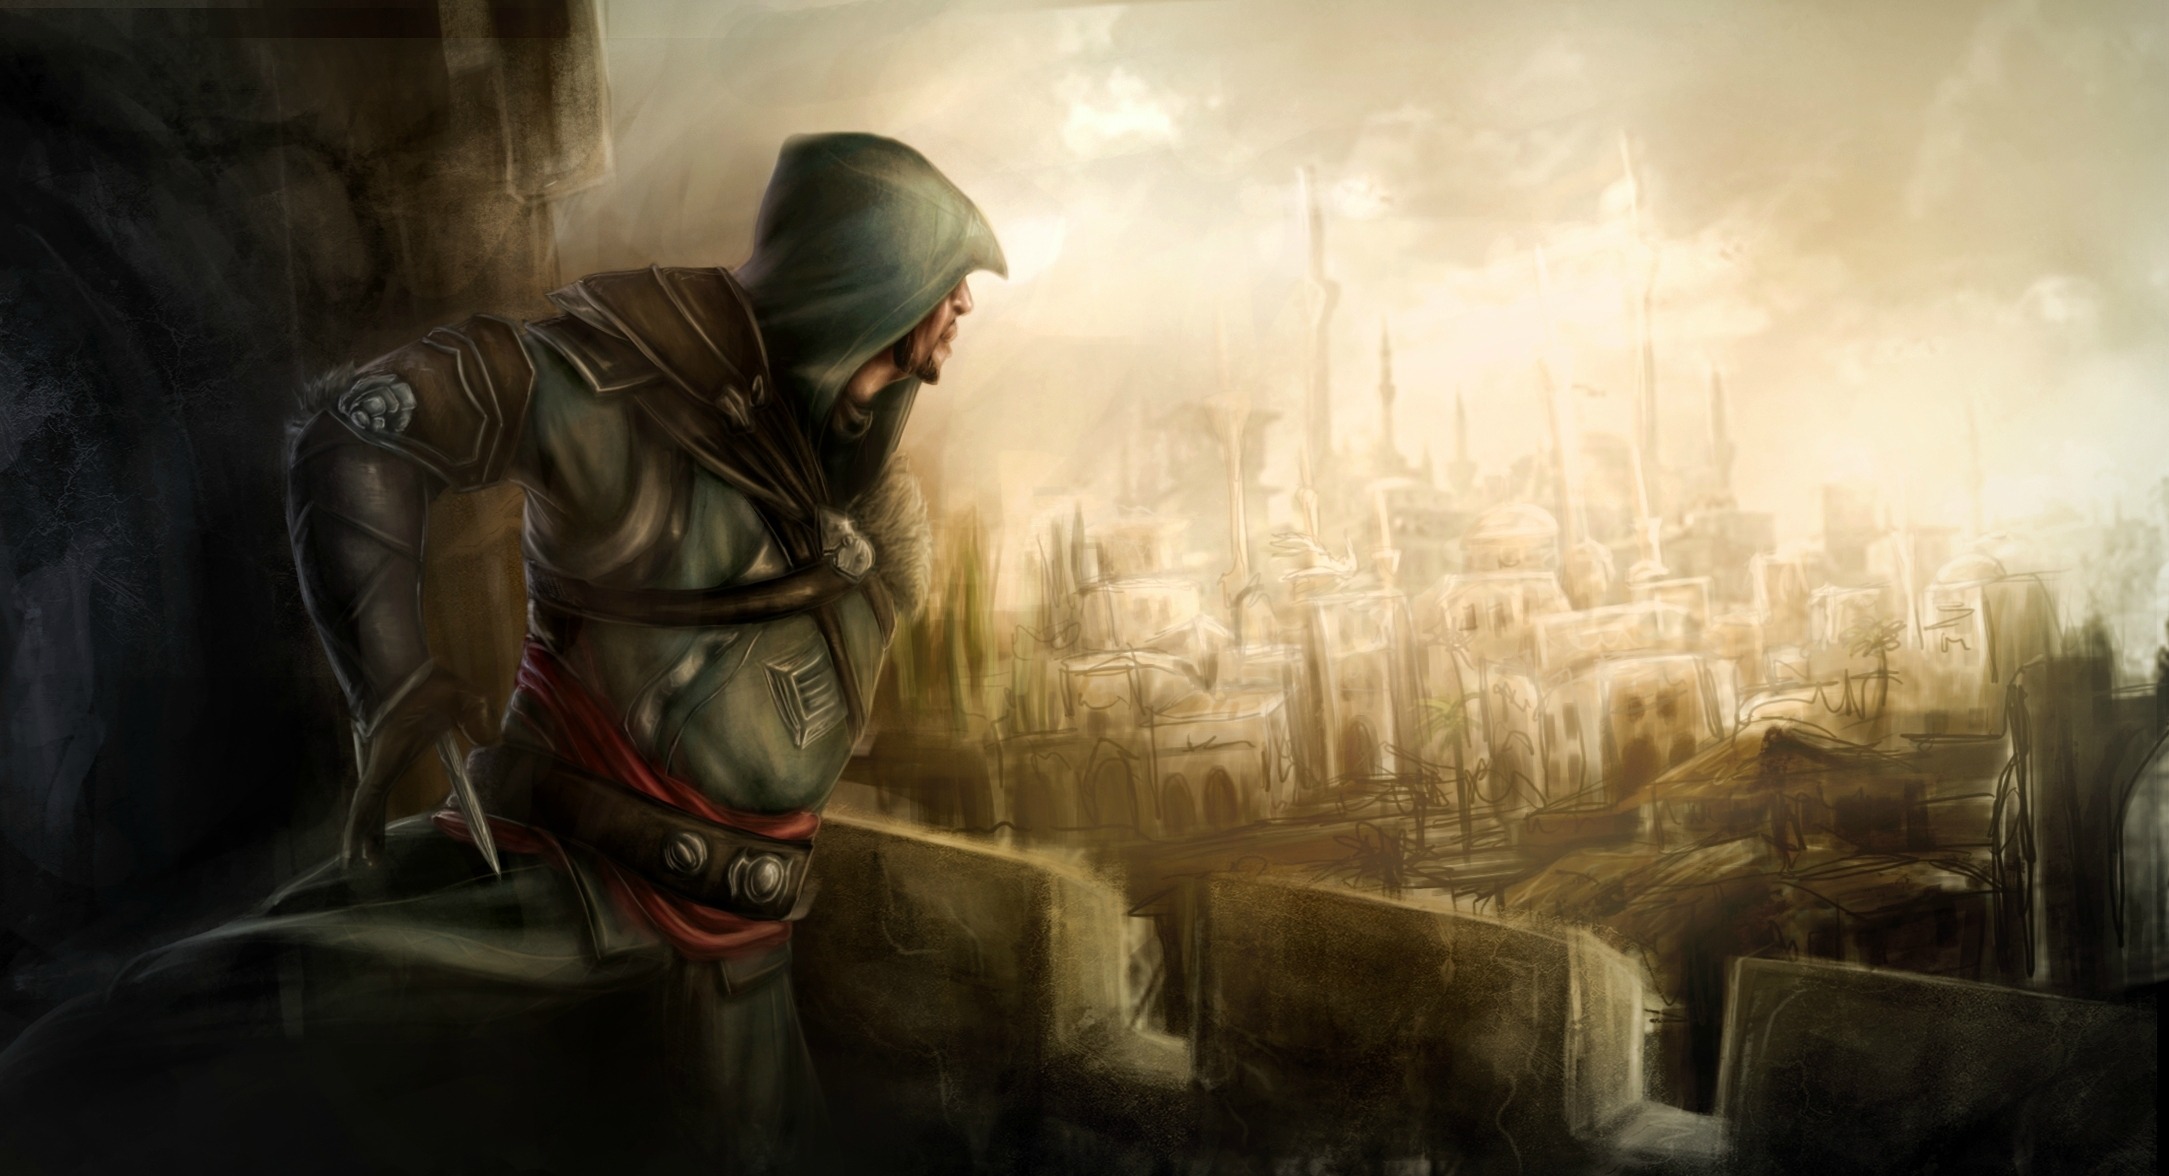 Video Game Assassins Creed Revelations 2169x1176